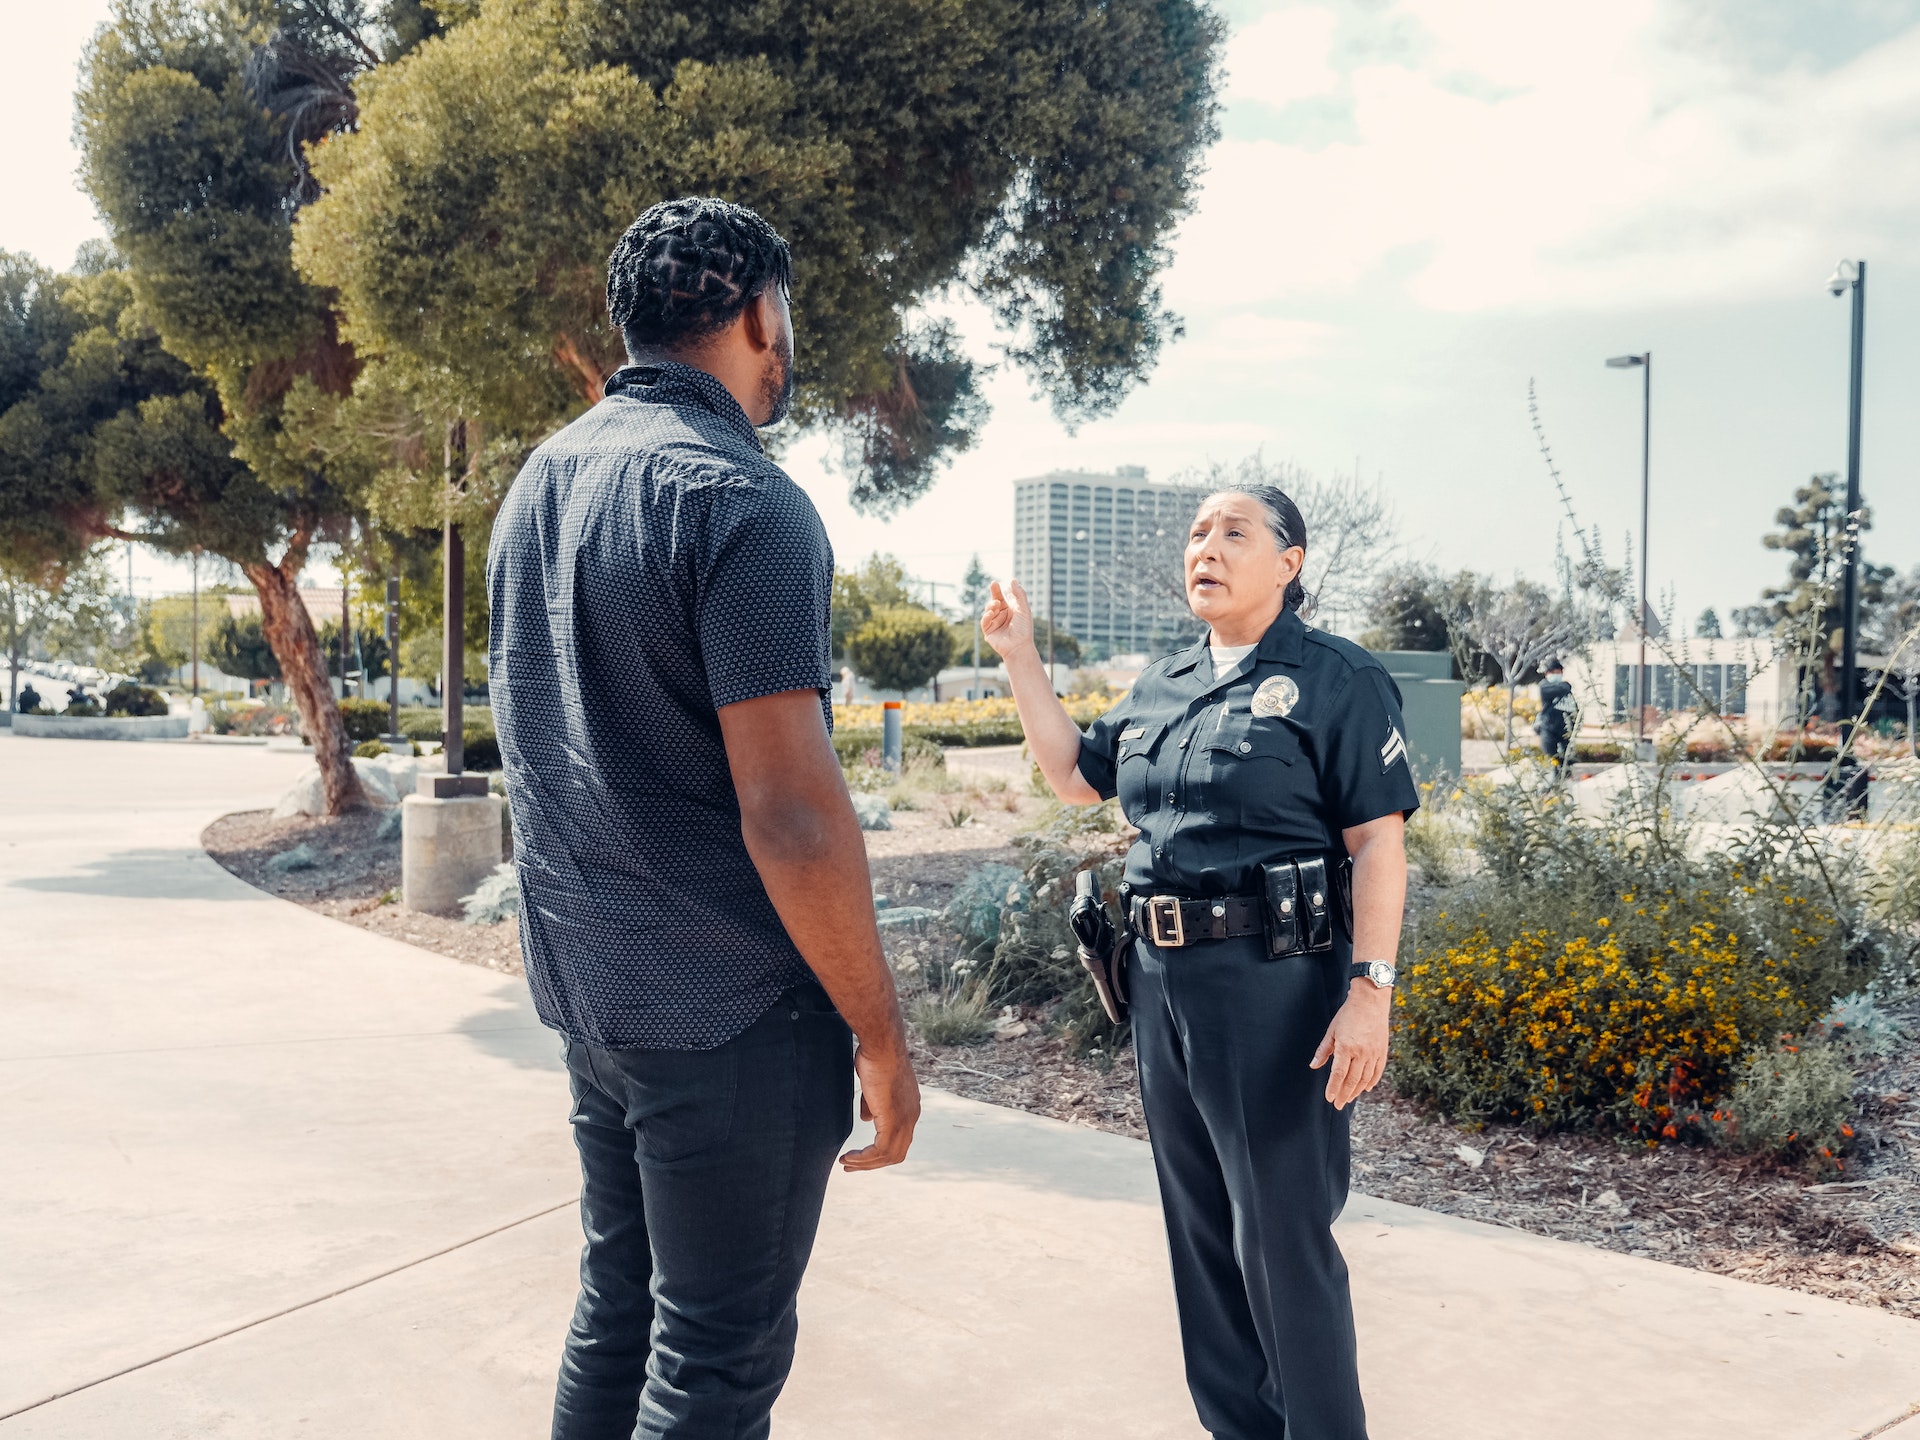 Photo by Kindel Media: https://www.pexels.com/photo/police-officer-talking-to-man-in-black-shirt-on-the-street-7714762/